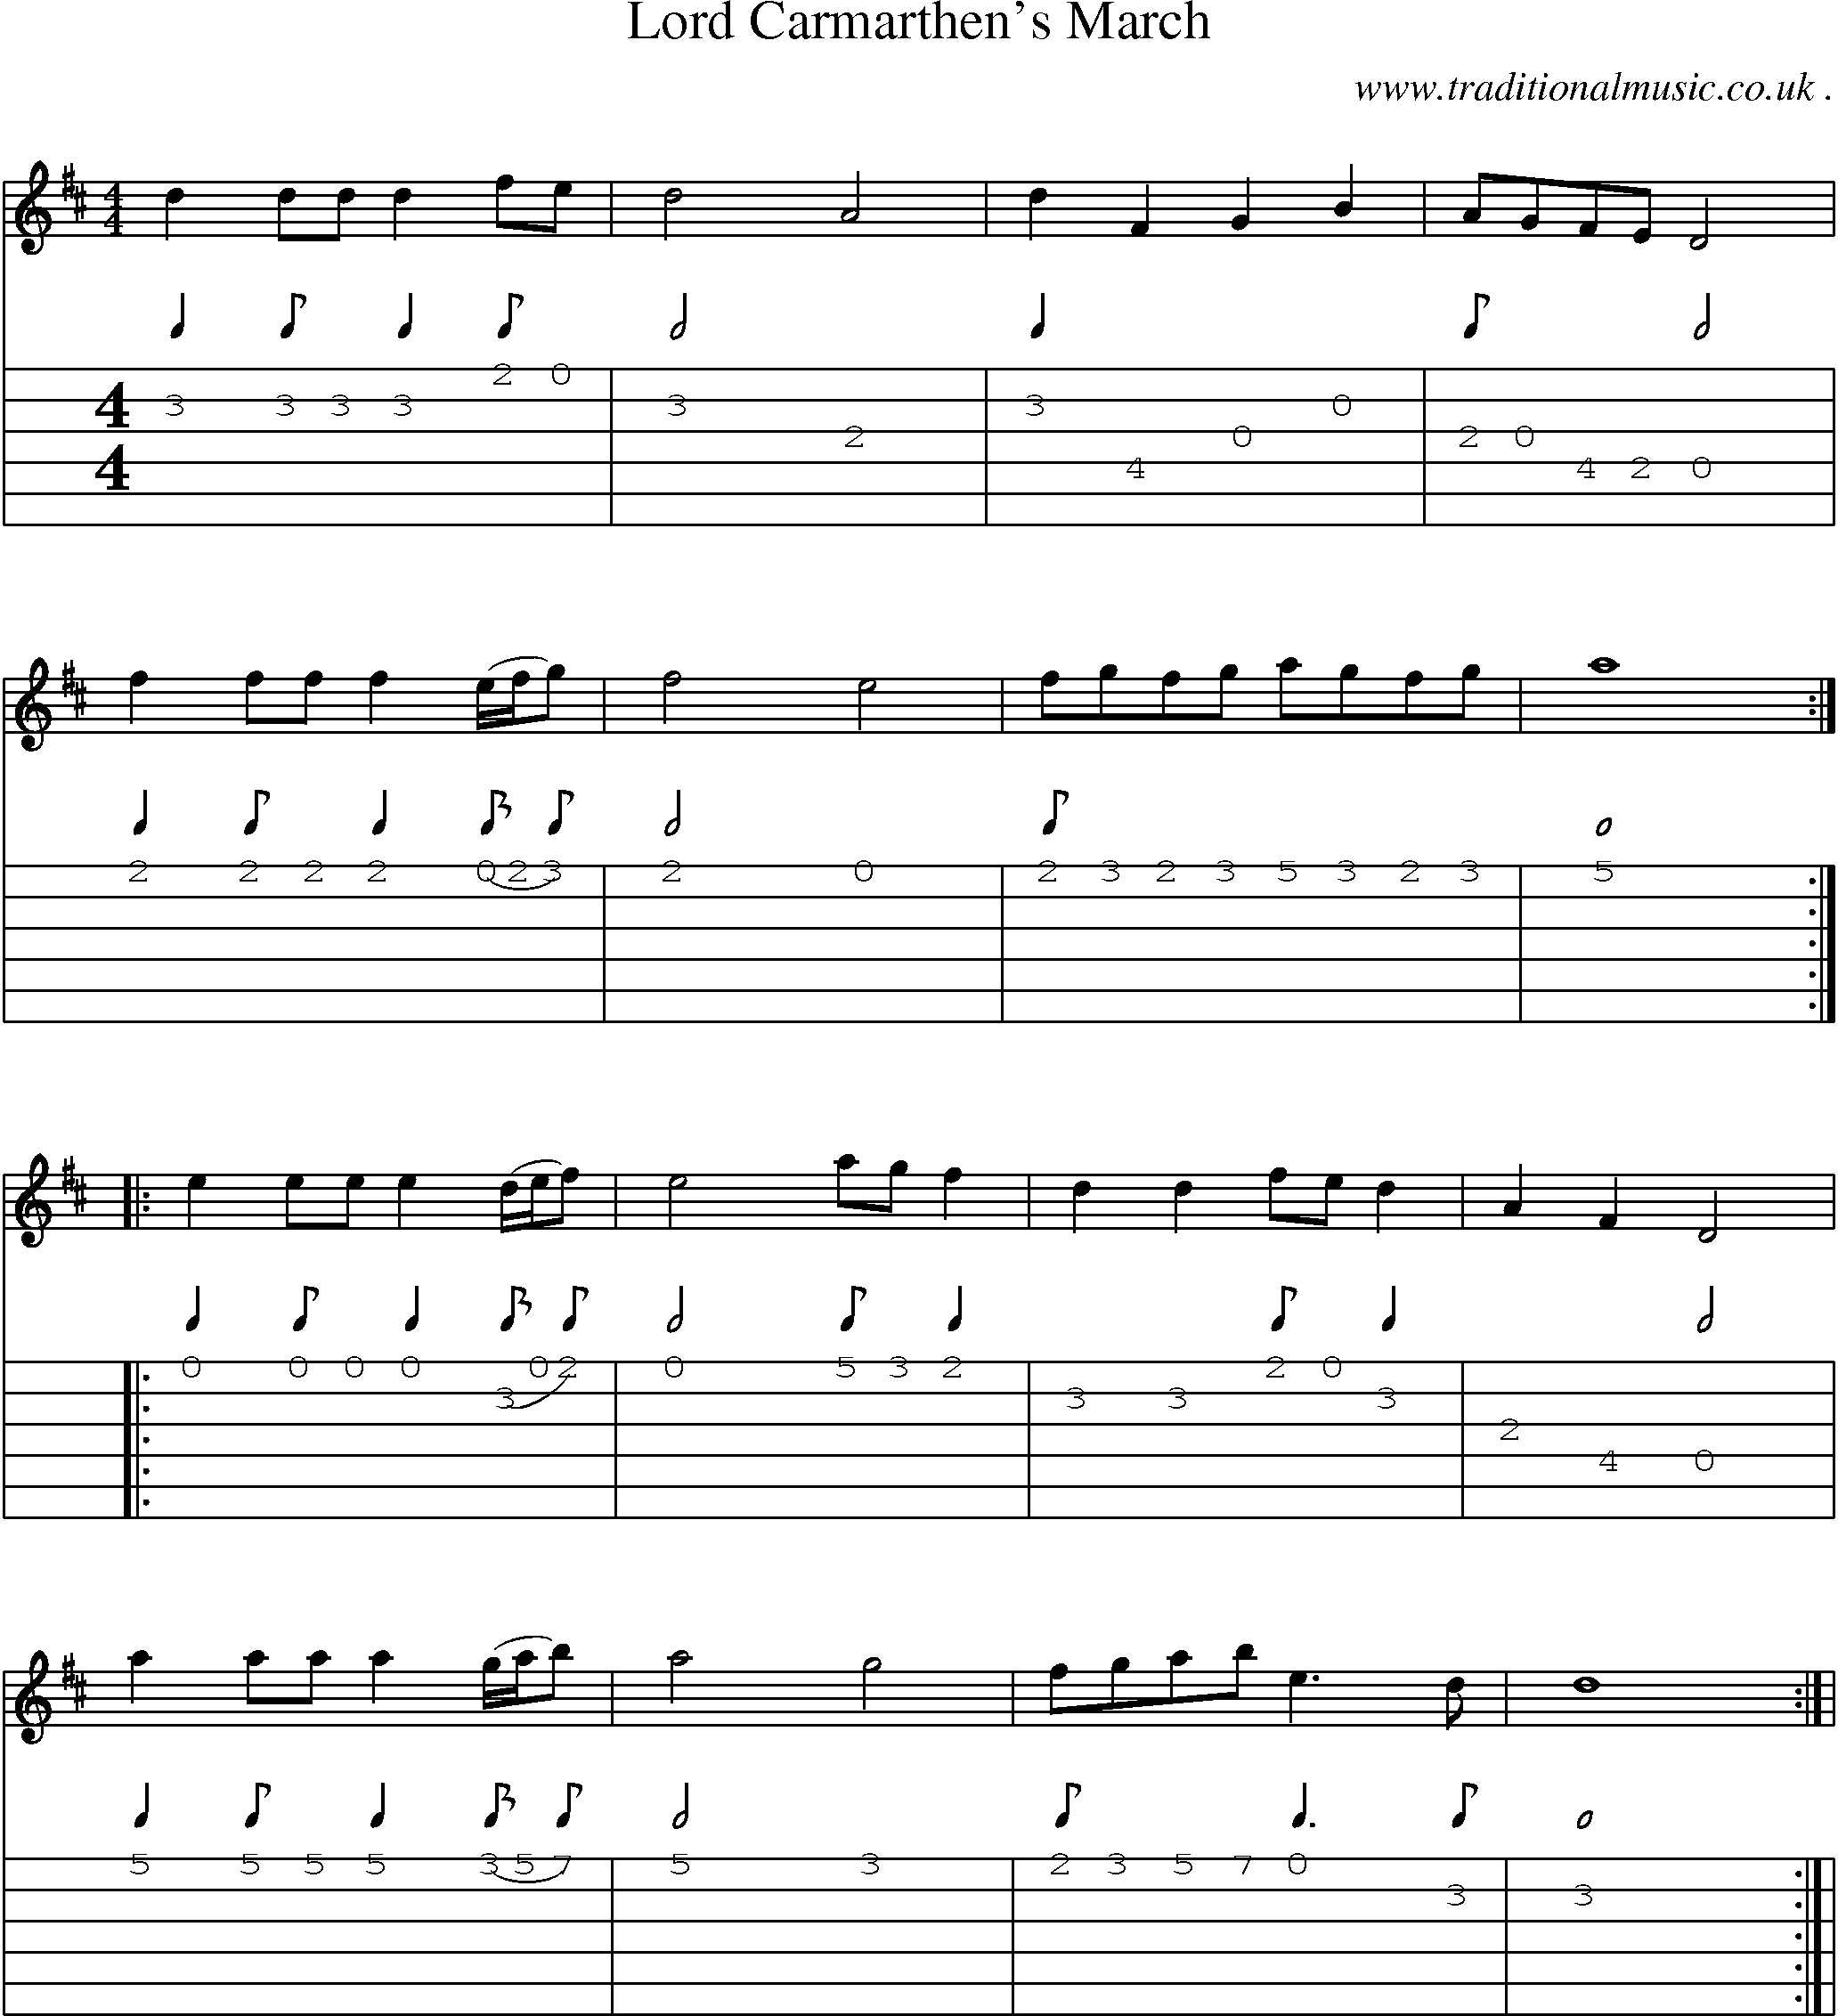 Sheet-Music and Guitar Tabs for Lord Carmarthens March